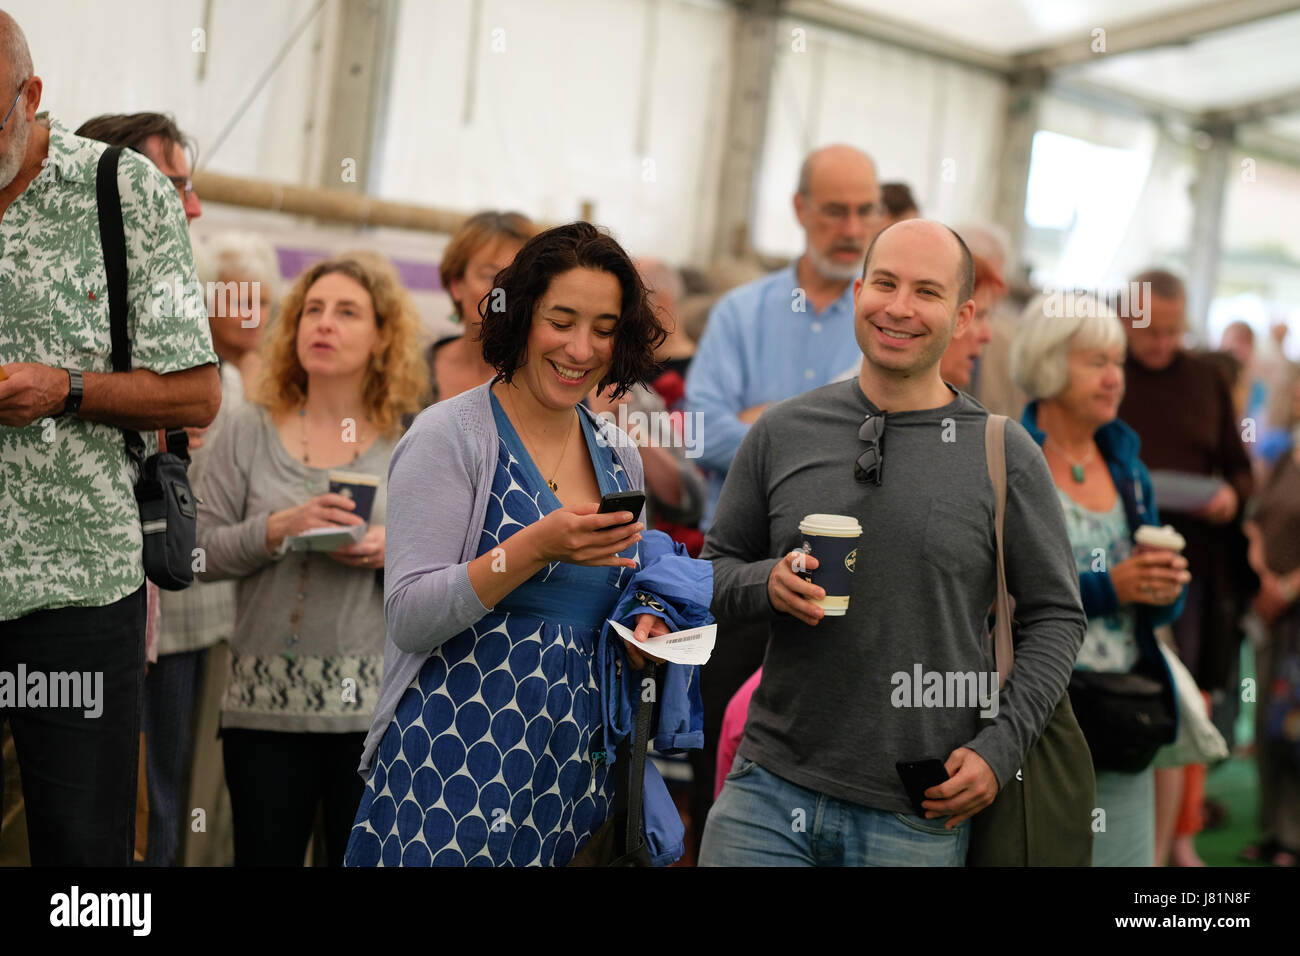 Hay Festival 2017 - Hay on Wye, Wales, UK - Saturday 27th May 2017 - Visitors wait for the stage to open to see the Egyptian novelist Ahdaf Soueif talking about her work This is Not a Border - the Hay Festival celebrates its 30th anniversary in 2017 - the literary festival runs until Sunday June 4th.  Steven May / Alamy Live News Stock Photo